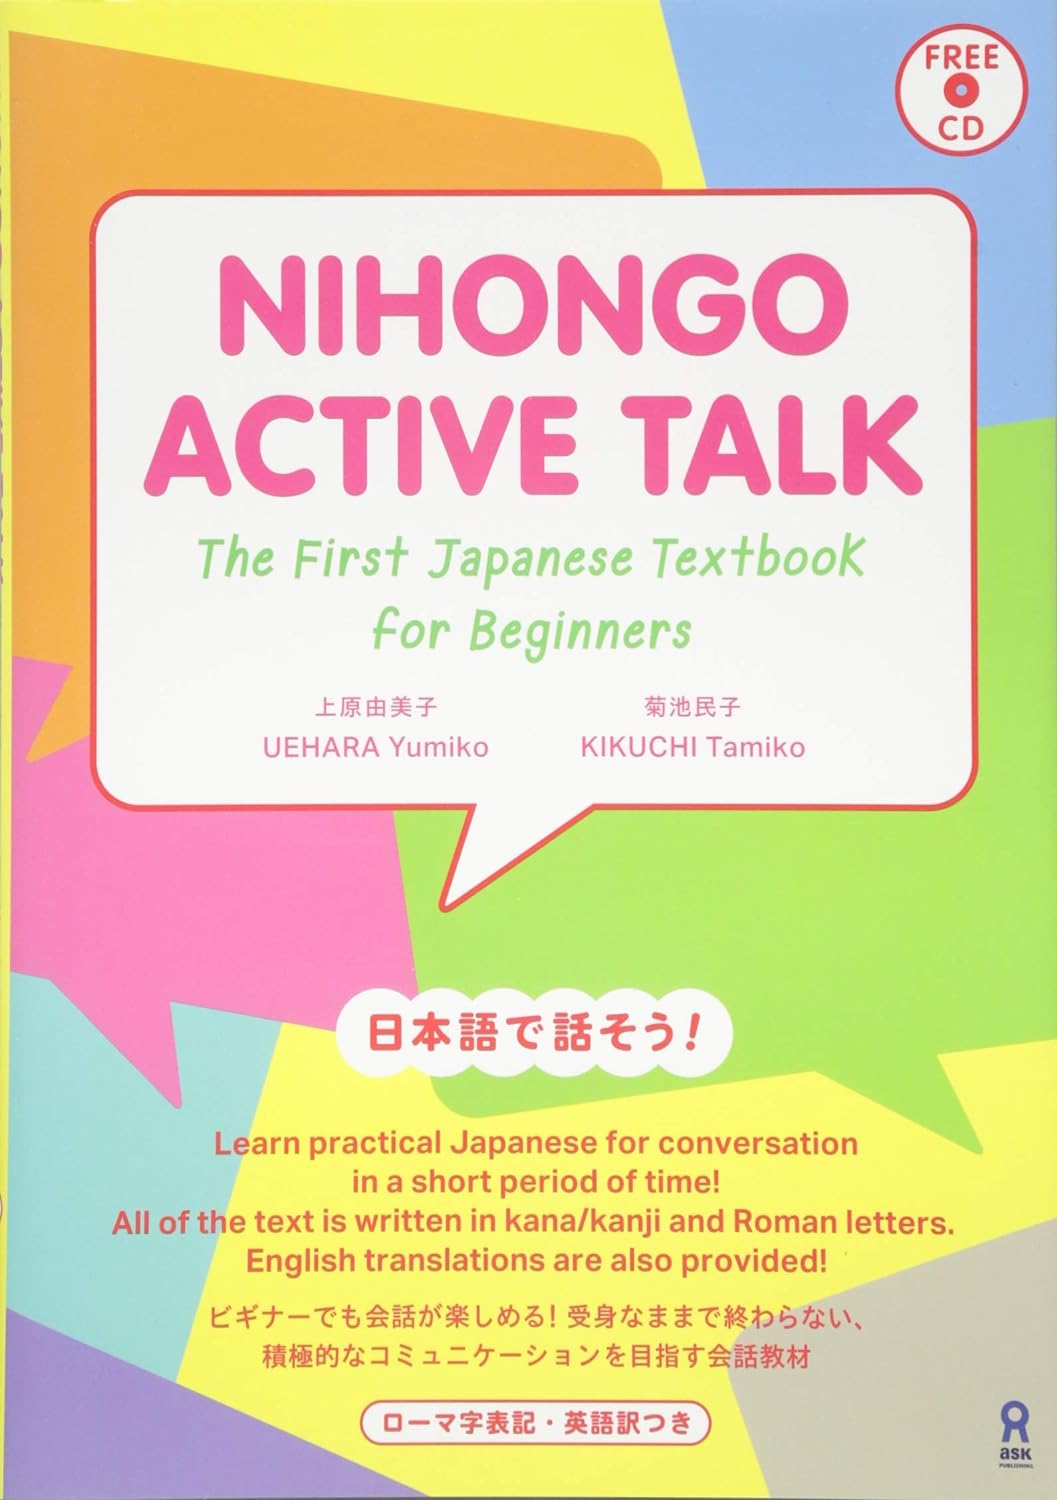 NIHONGO ACTIVE TALK The First Japanese Textbook for Beginners